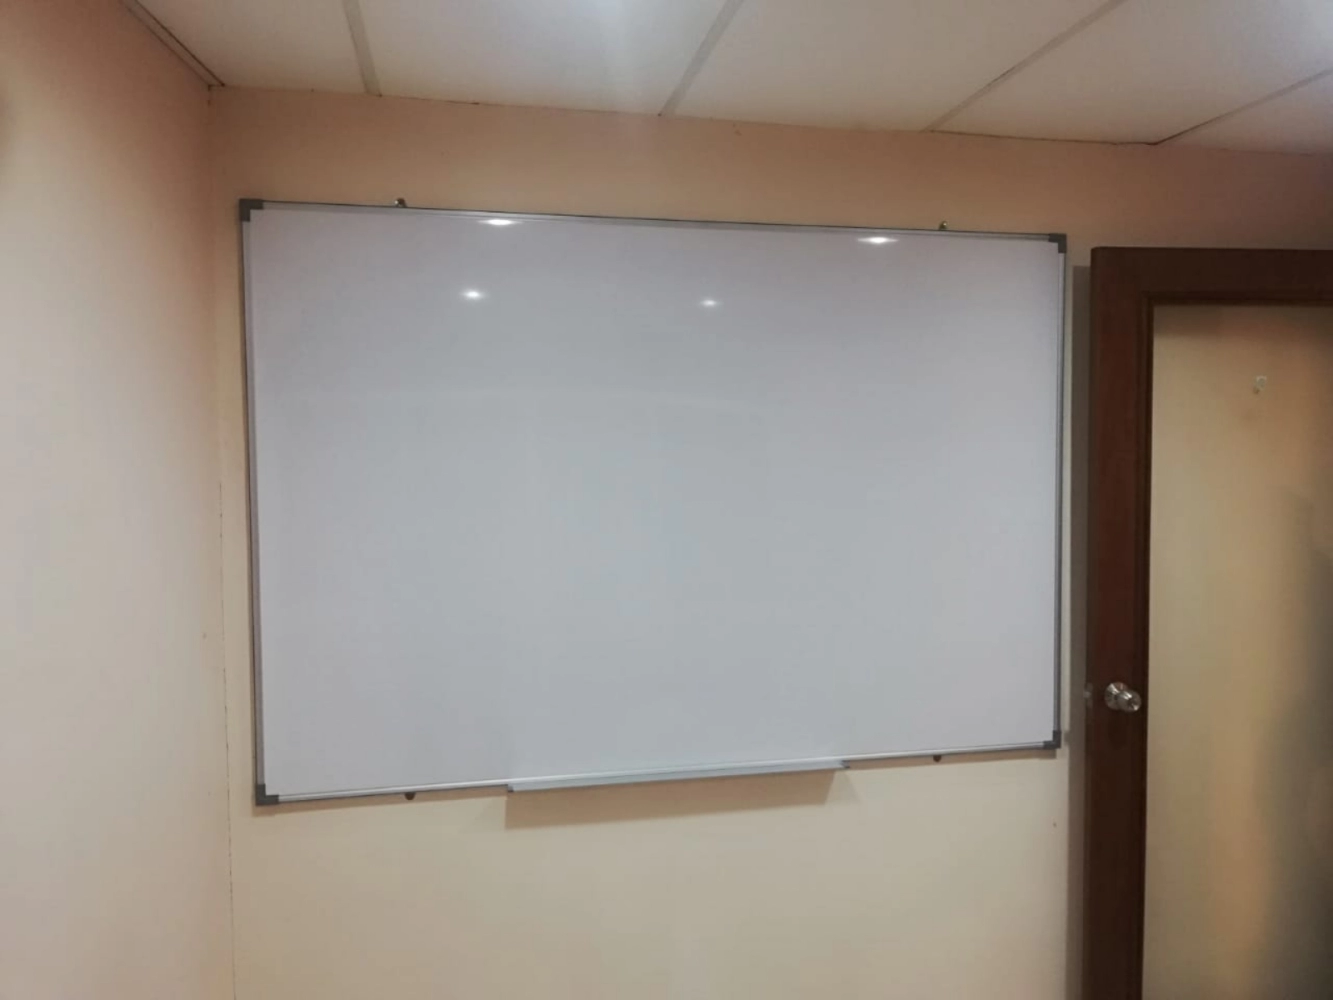 Single Sided Magnetic WhiteBoard for school college factory University